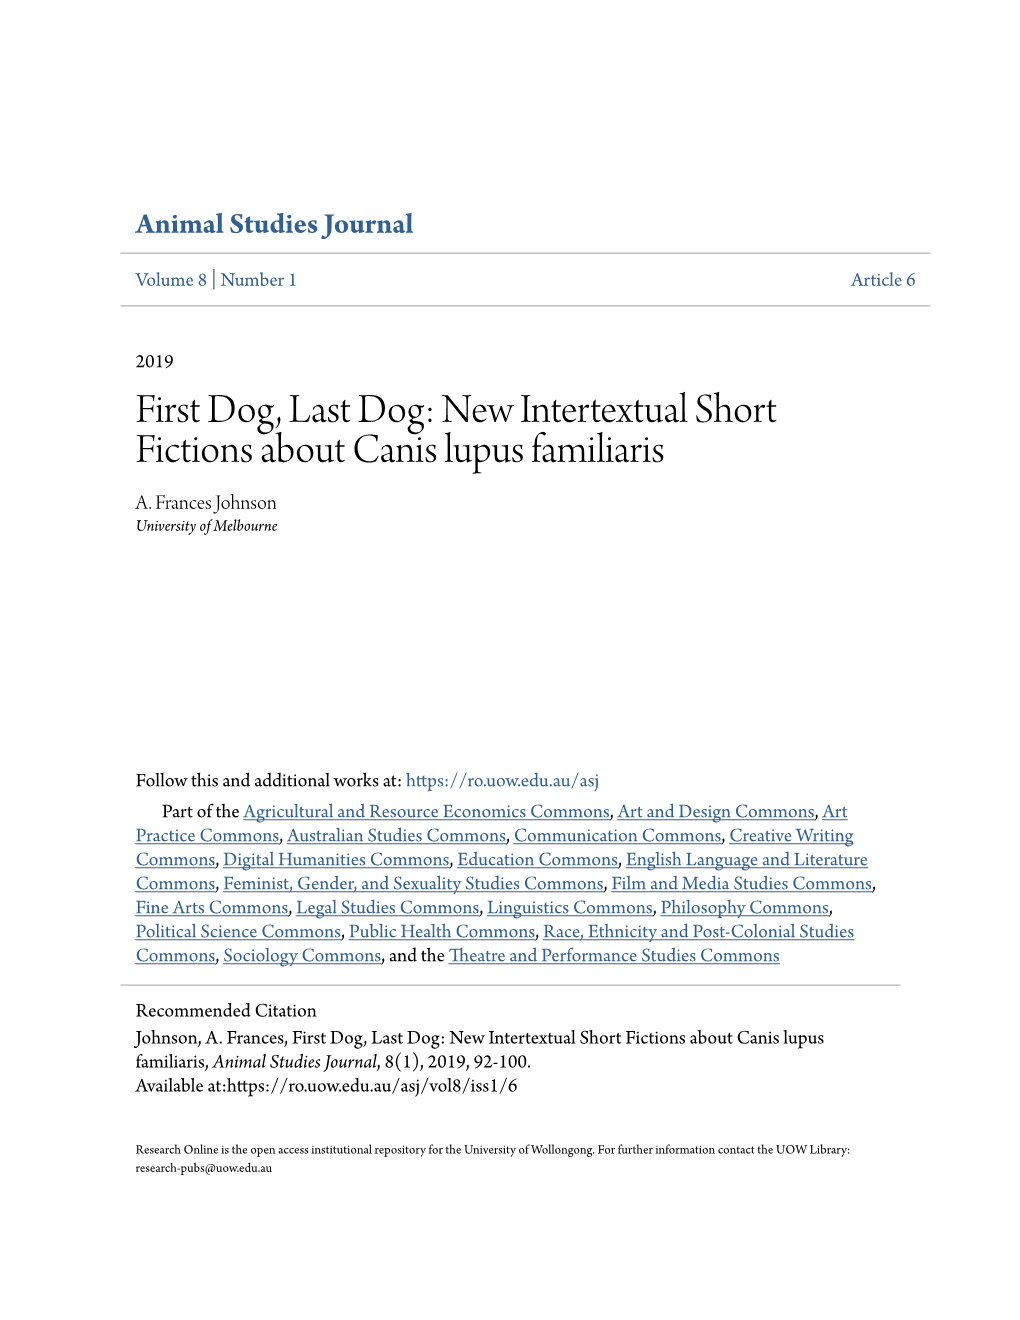 First Dog, Last Dog: New Intertextual Short Fictions About Canis Lupus Familiaris A